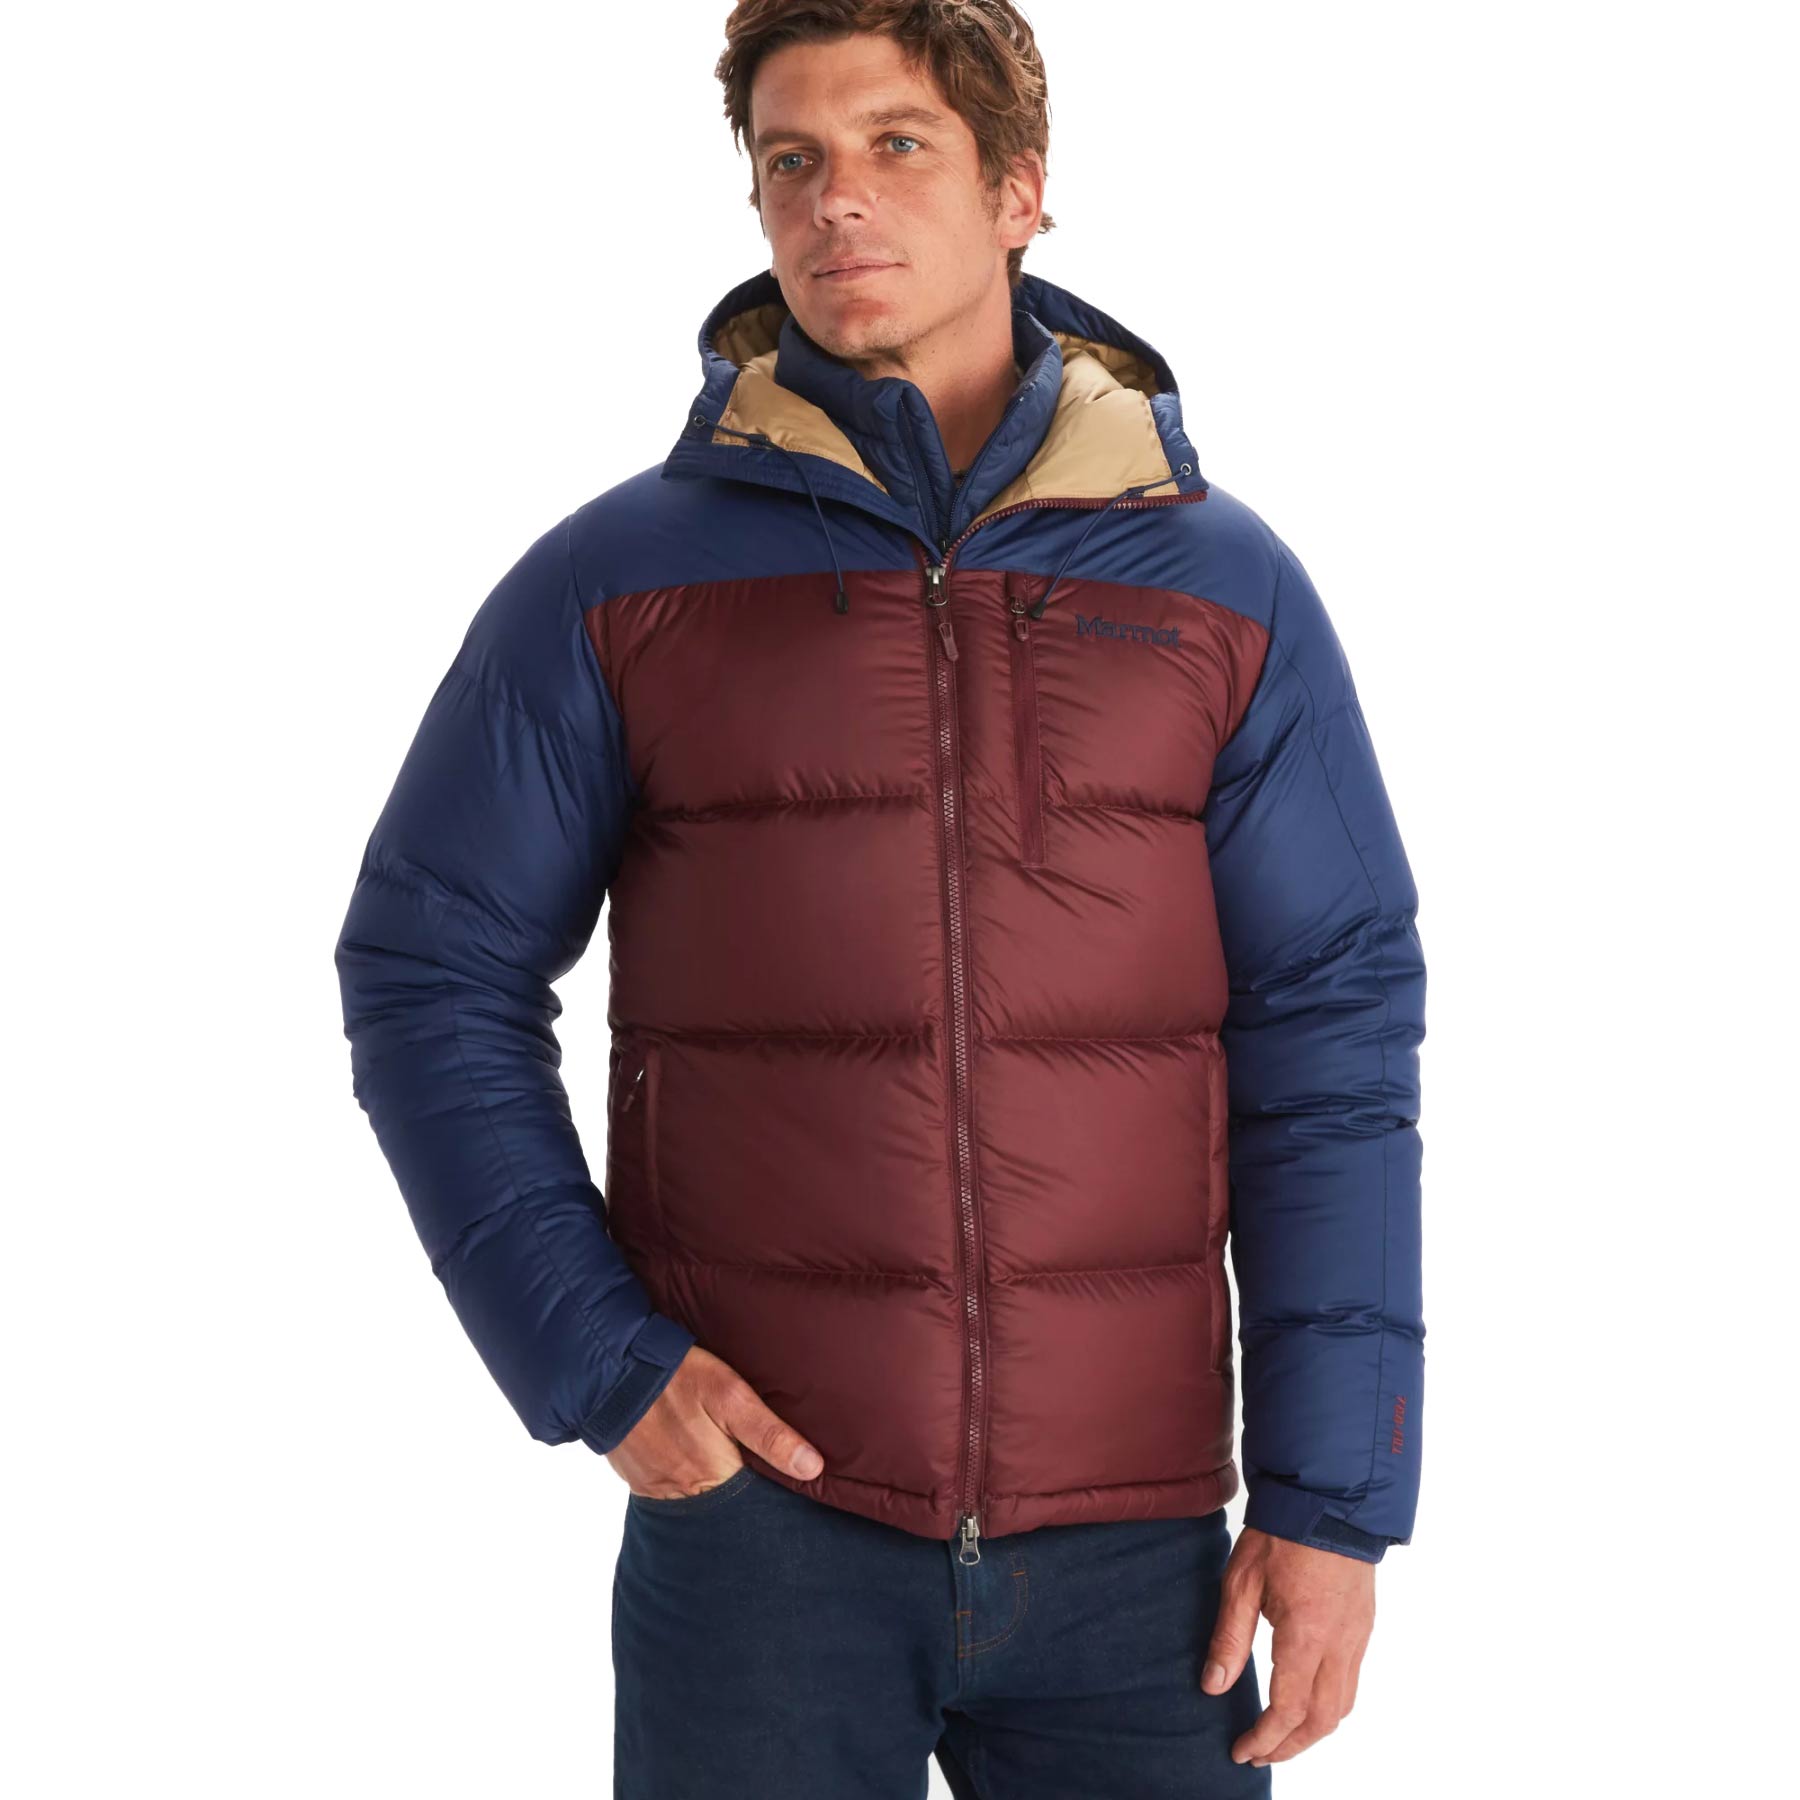 Image of Marmot Guides Down Hooded Jacket - port royal/arctic navy